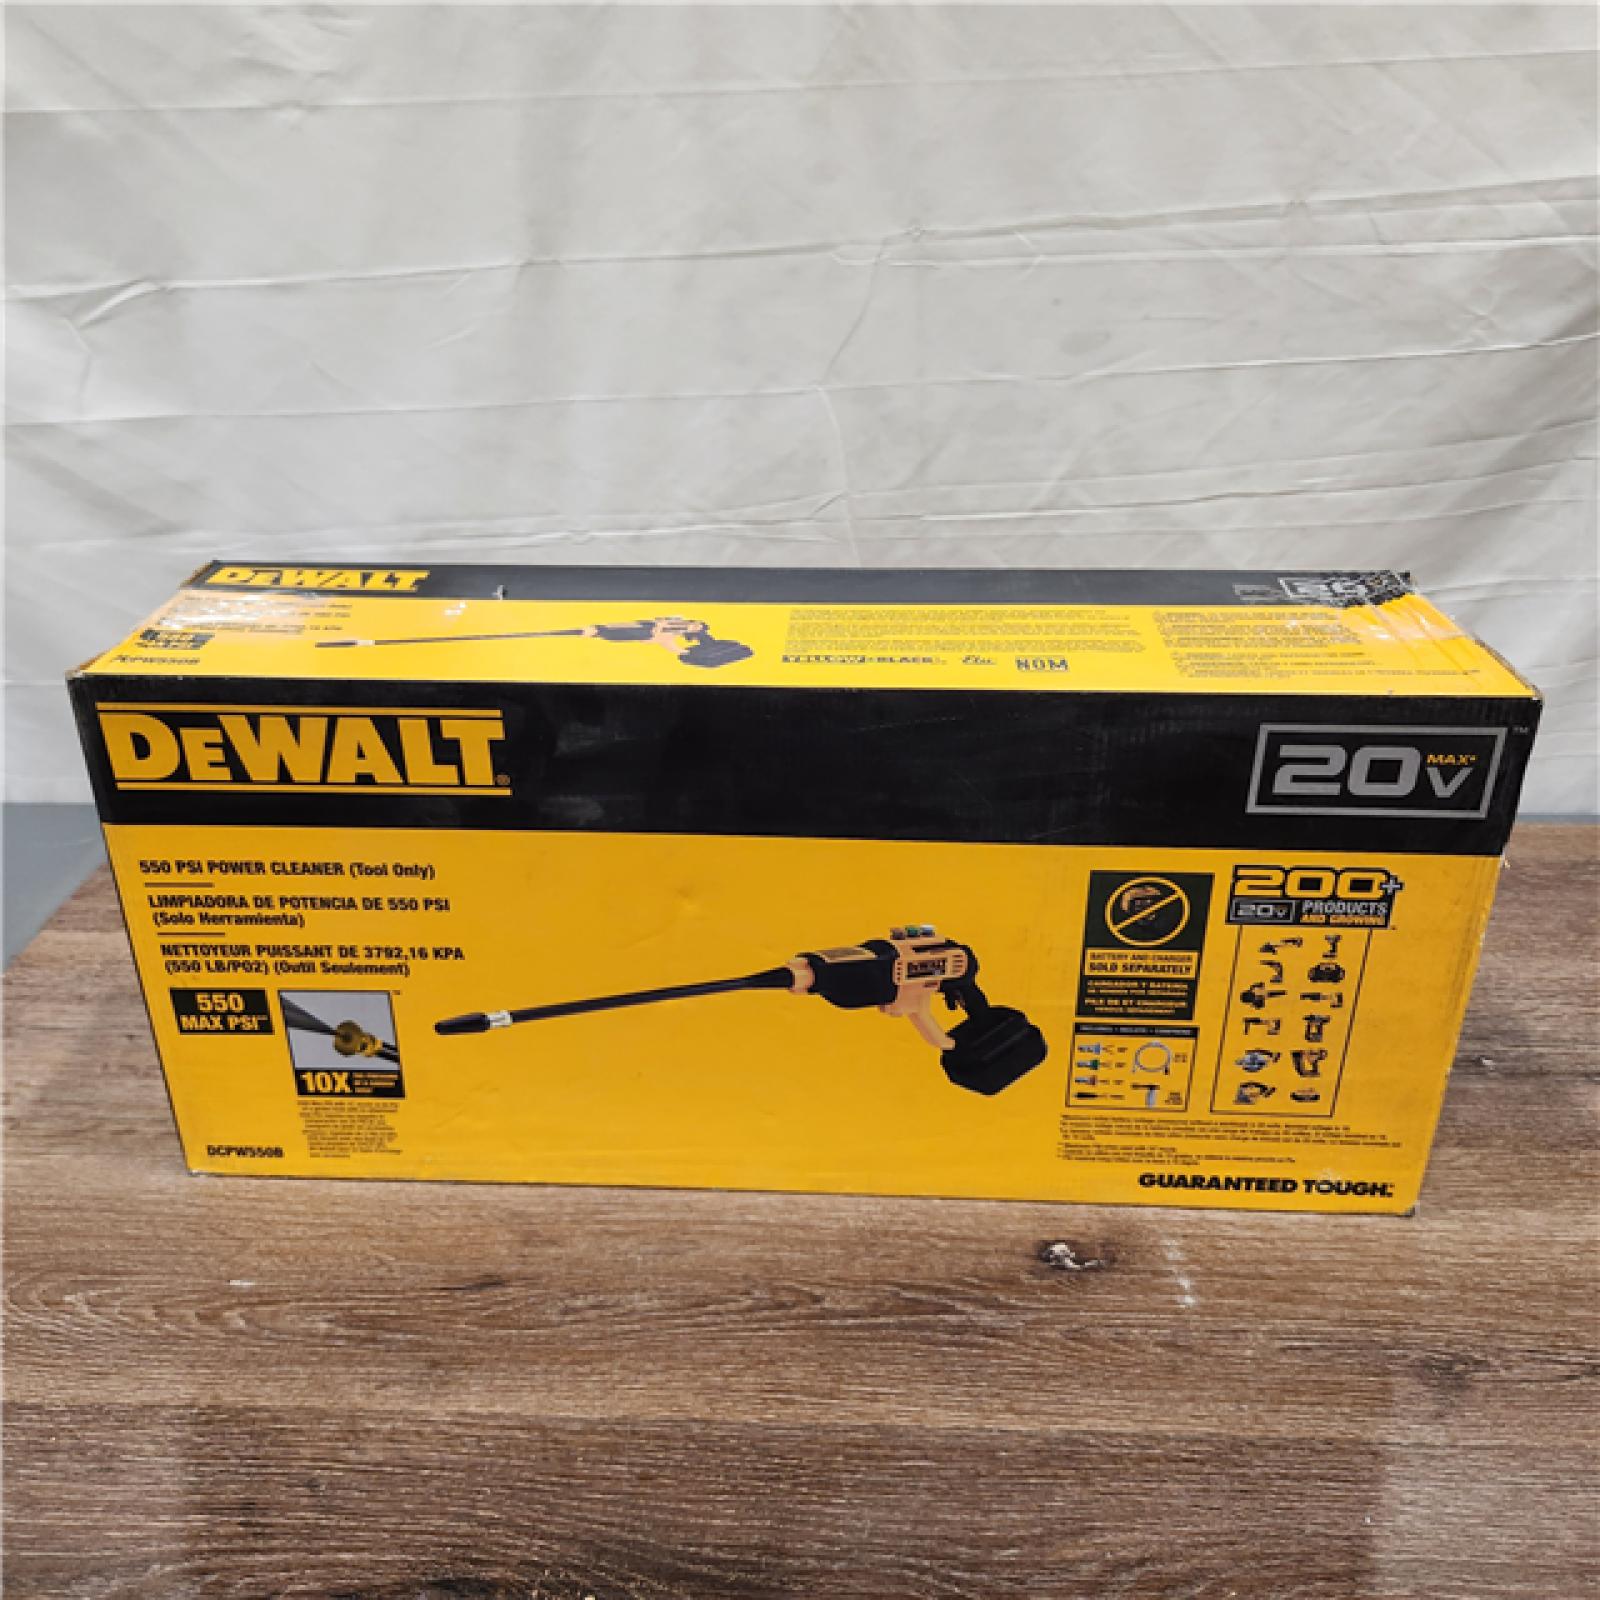 AS-IS DCPW550B 20V 550 PSI Power Cleaner - Black & Yellow